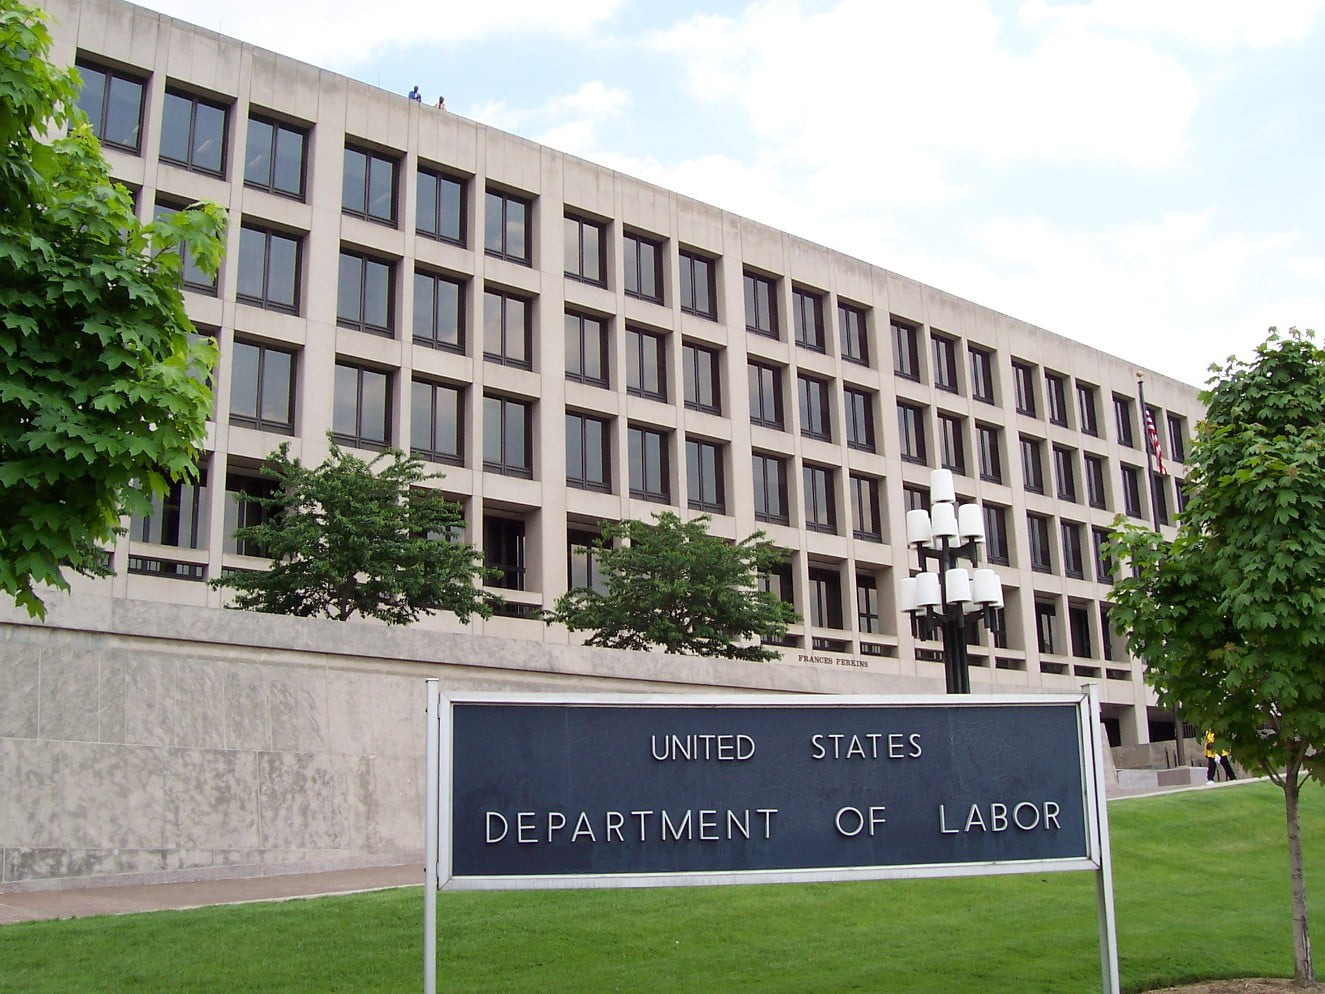 The Frances Perkins Building of the U.S. Department of Labor headquarters in Washington, D.C.